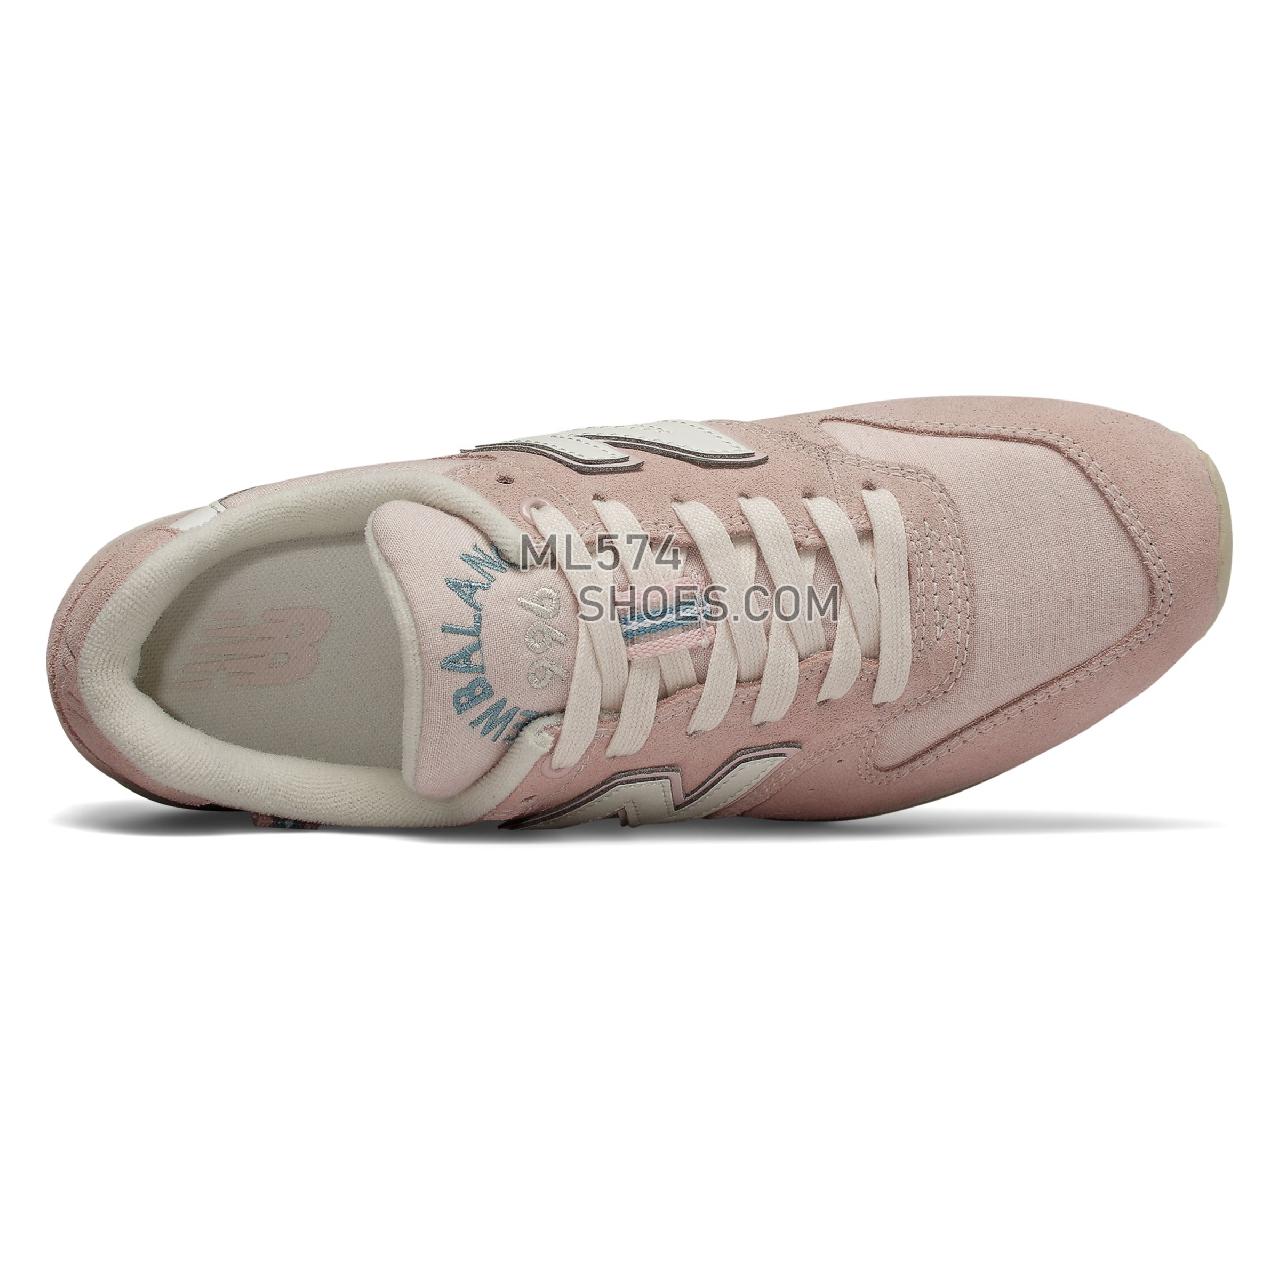 New Balance Suede 996 - Women's Suede 996 Running - Oyster Pink with Sea Salt - WR996YD